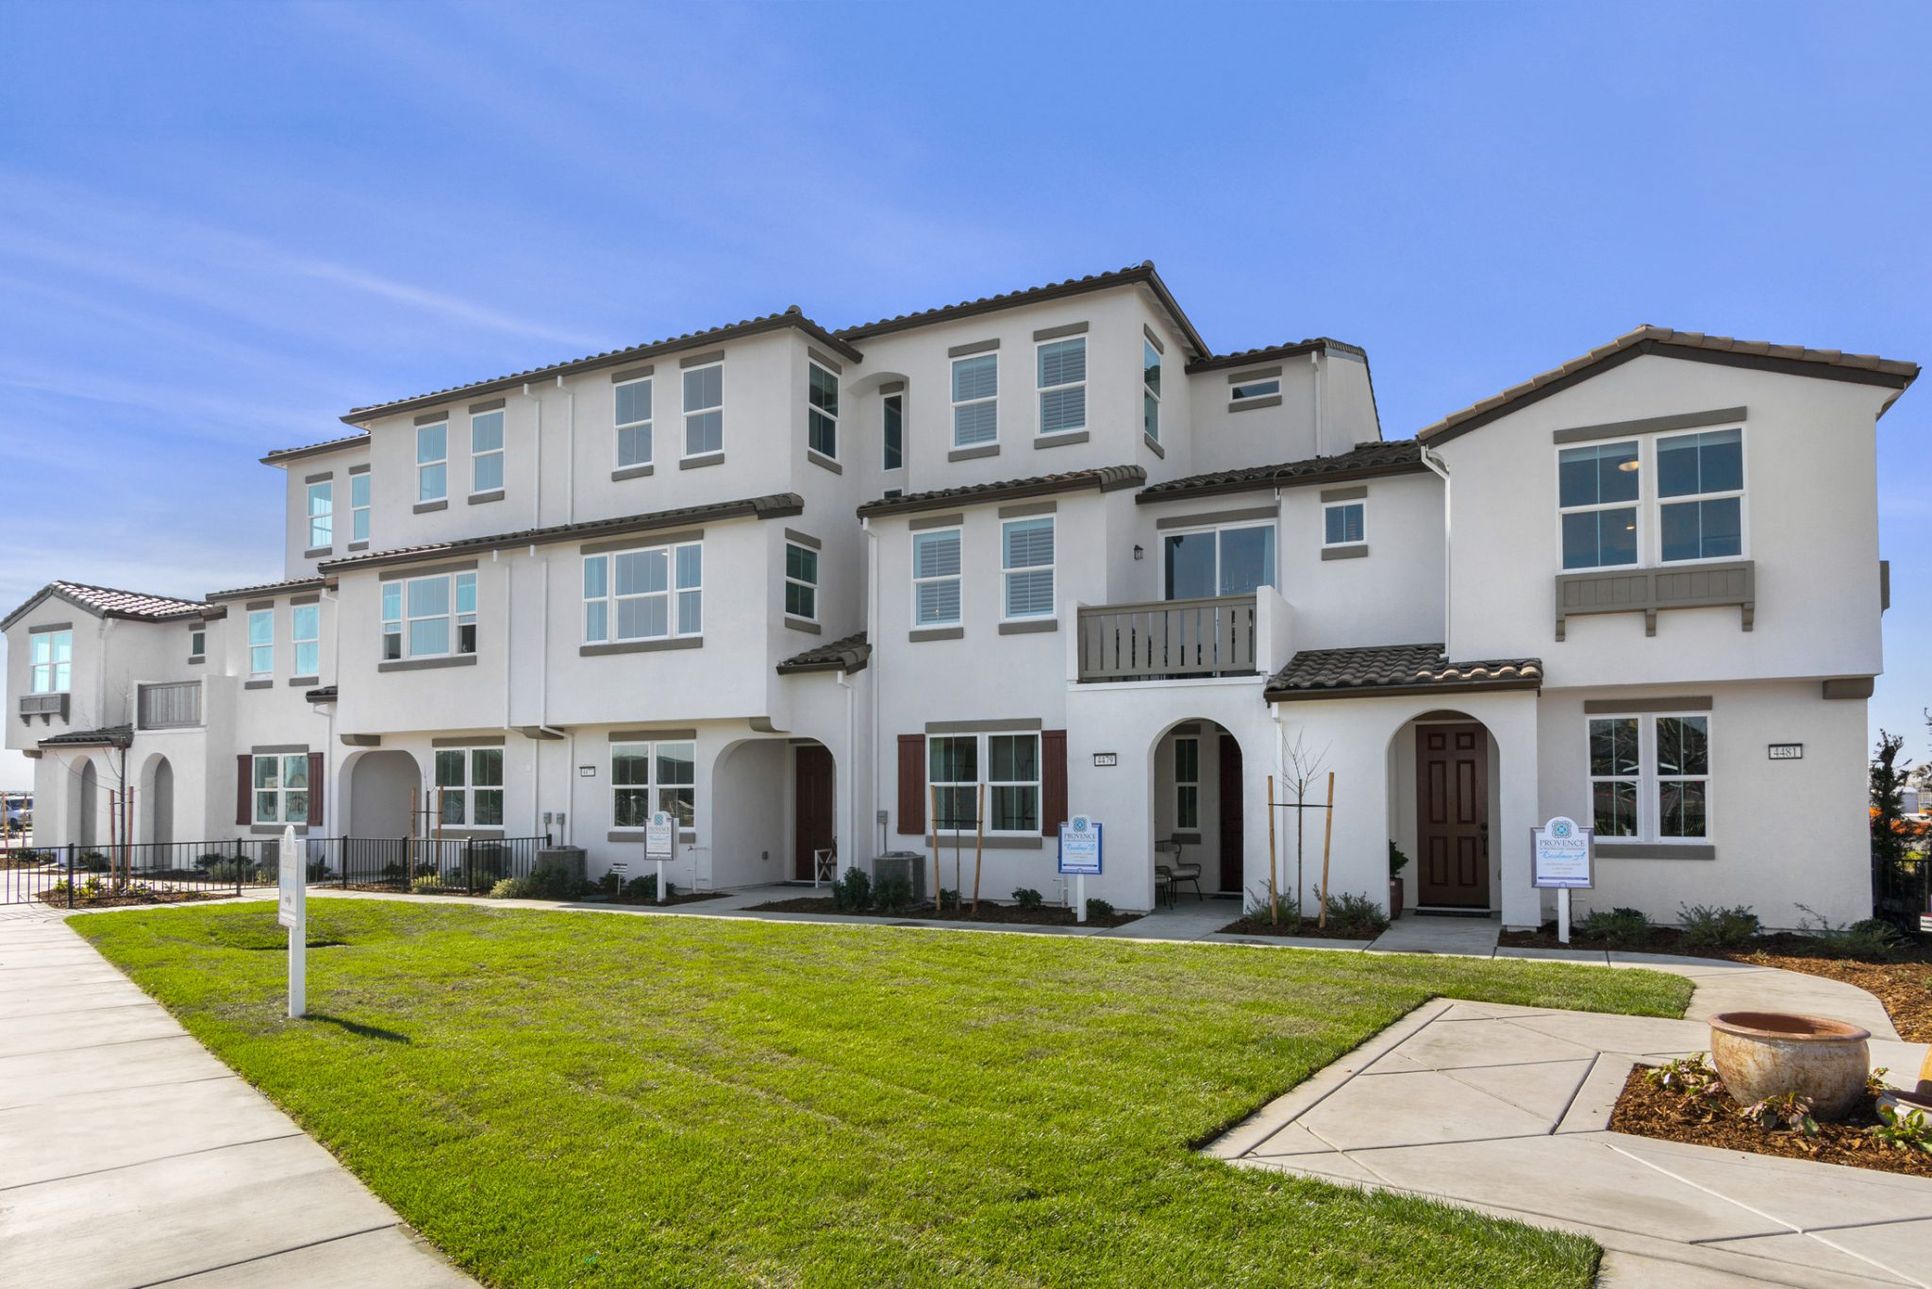 NEW HOMES FOR SALE IN THE BAY AREA